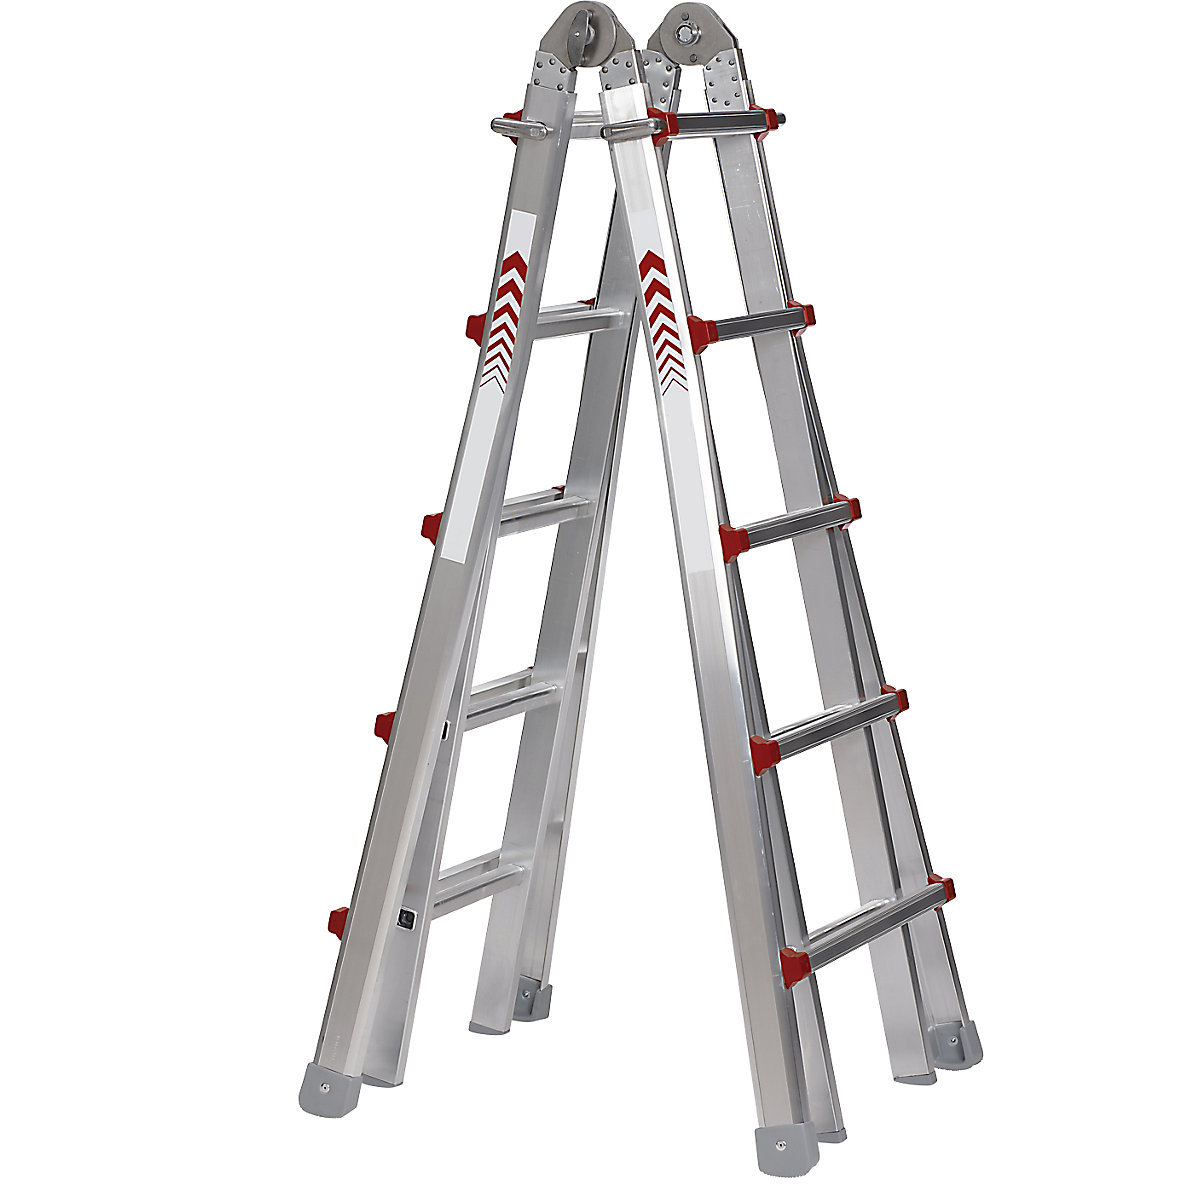 Telescopic folding ladder, stepladder, lean-to ladder and stair ladder in one, 4 x 5 rungs-13